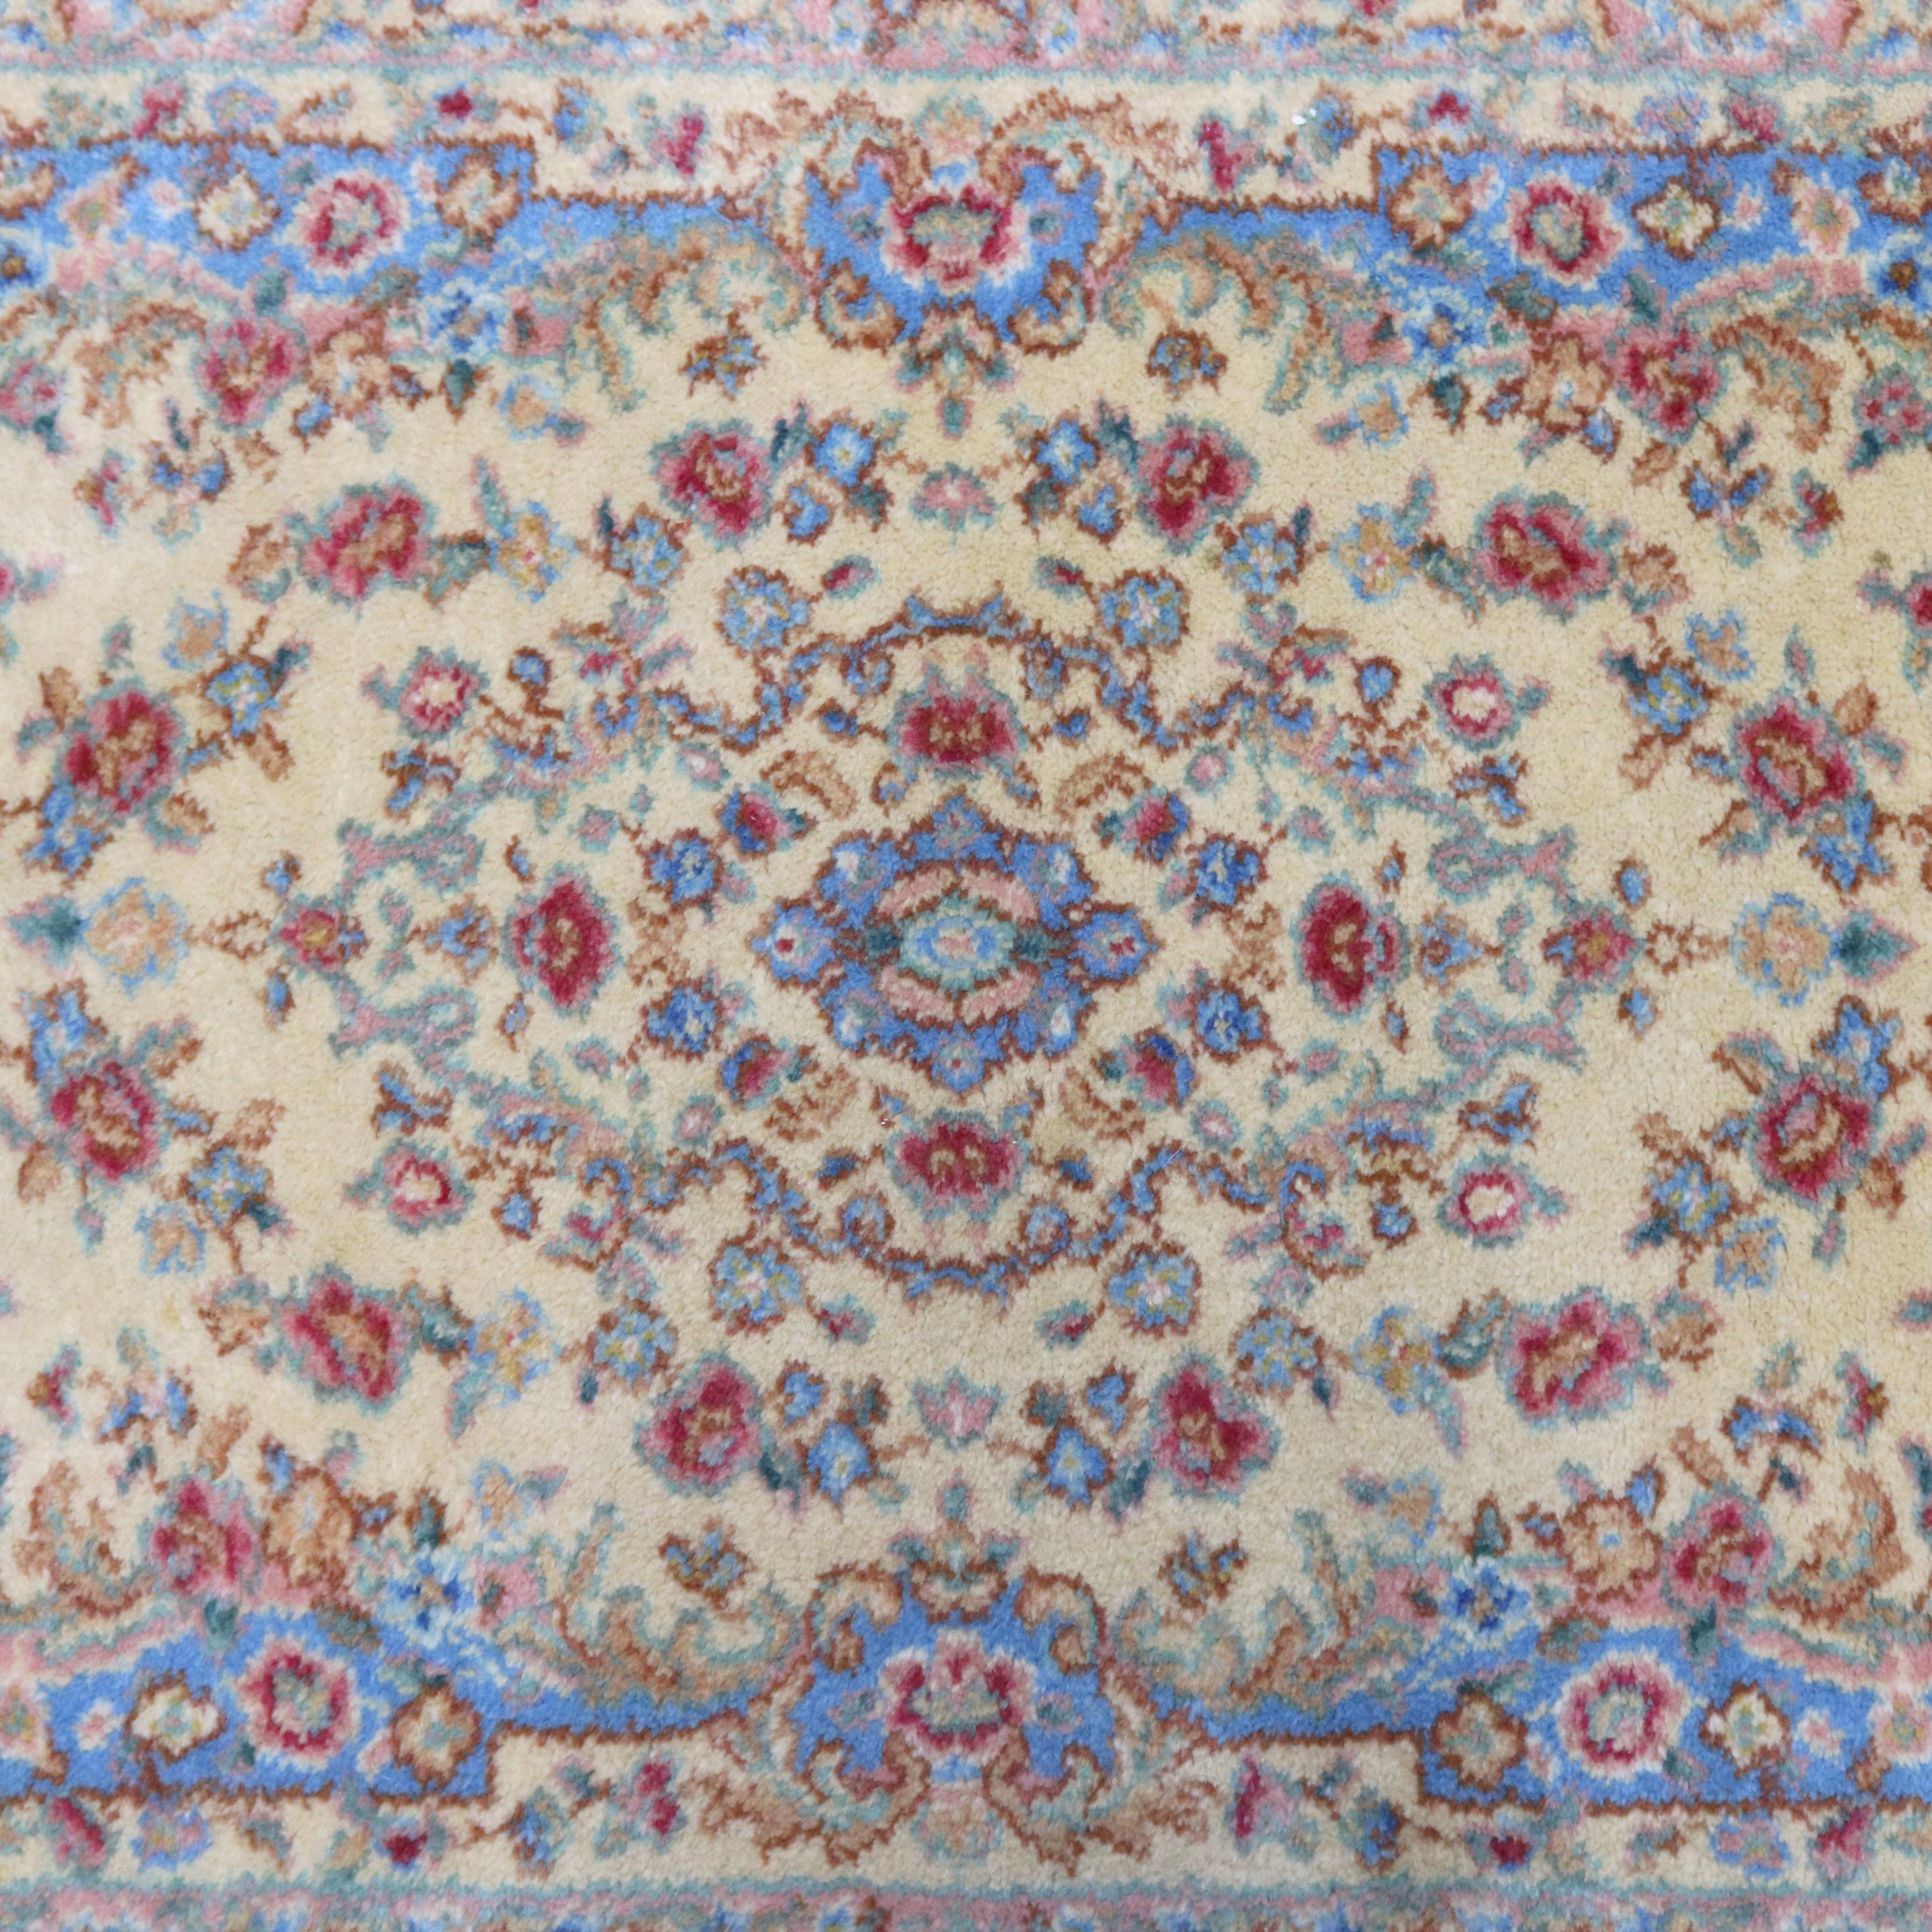 A vintage Karastan ivory medallion #711 Oriental rug offers blue, white and ink in pastel color palette with floral motif, circa 1950

Measures: 2.10' x 5'.